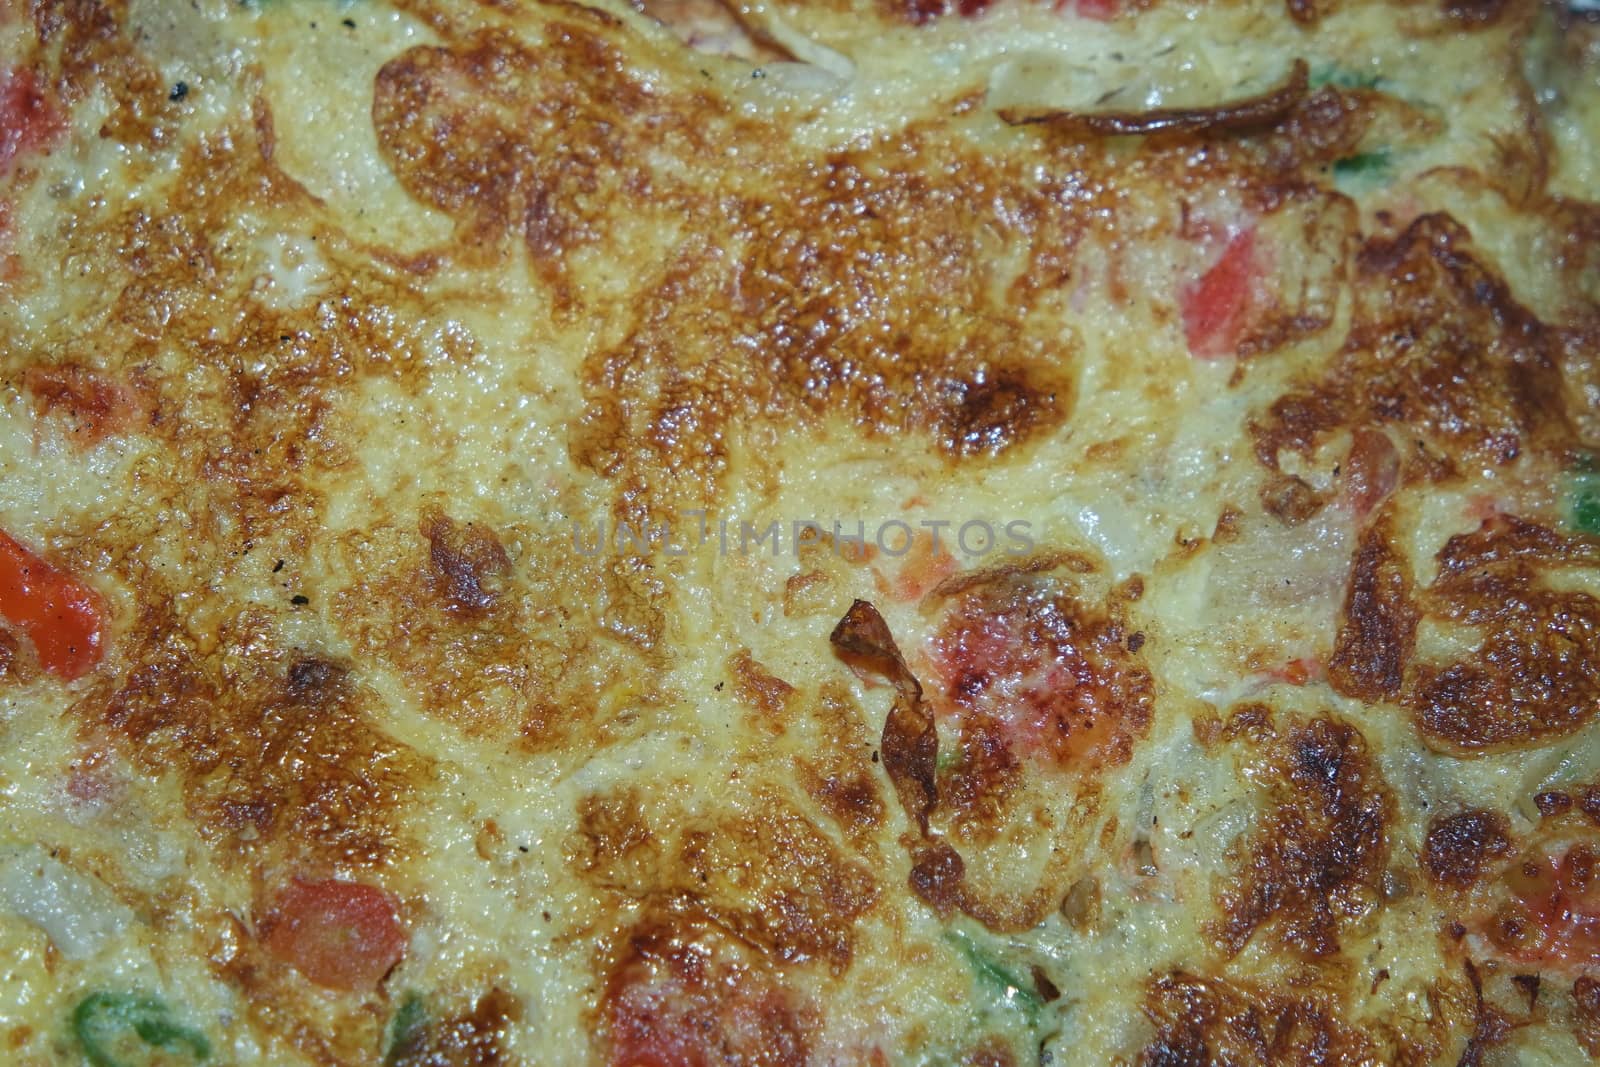 Close-up viewof egg omelet with peppers and spices sprinkled by Photochowk